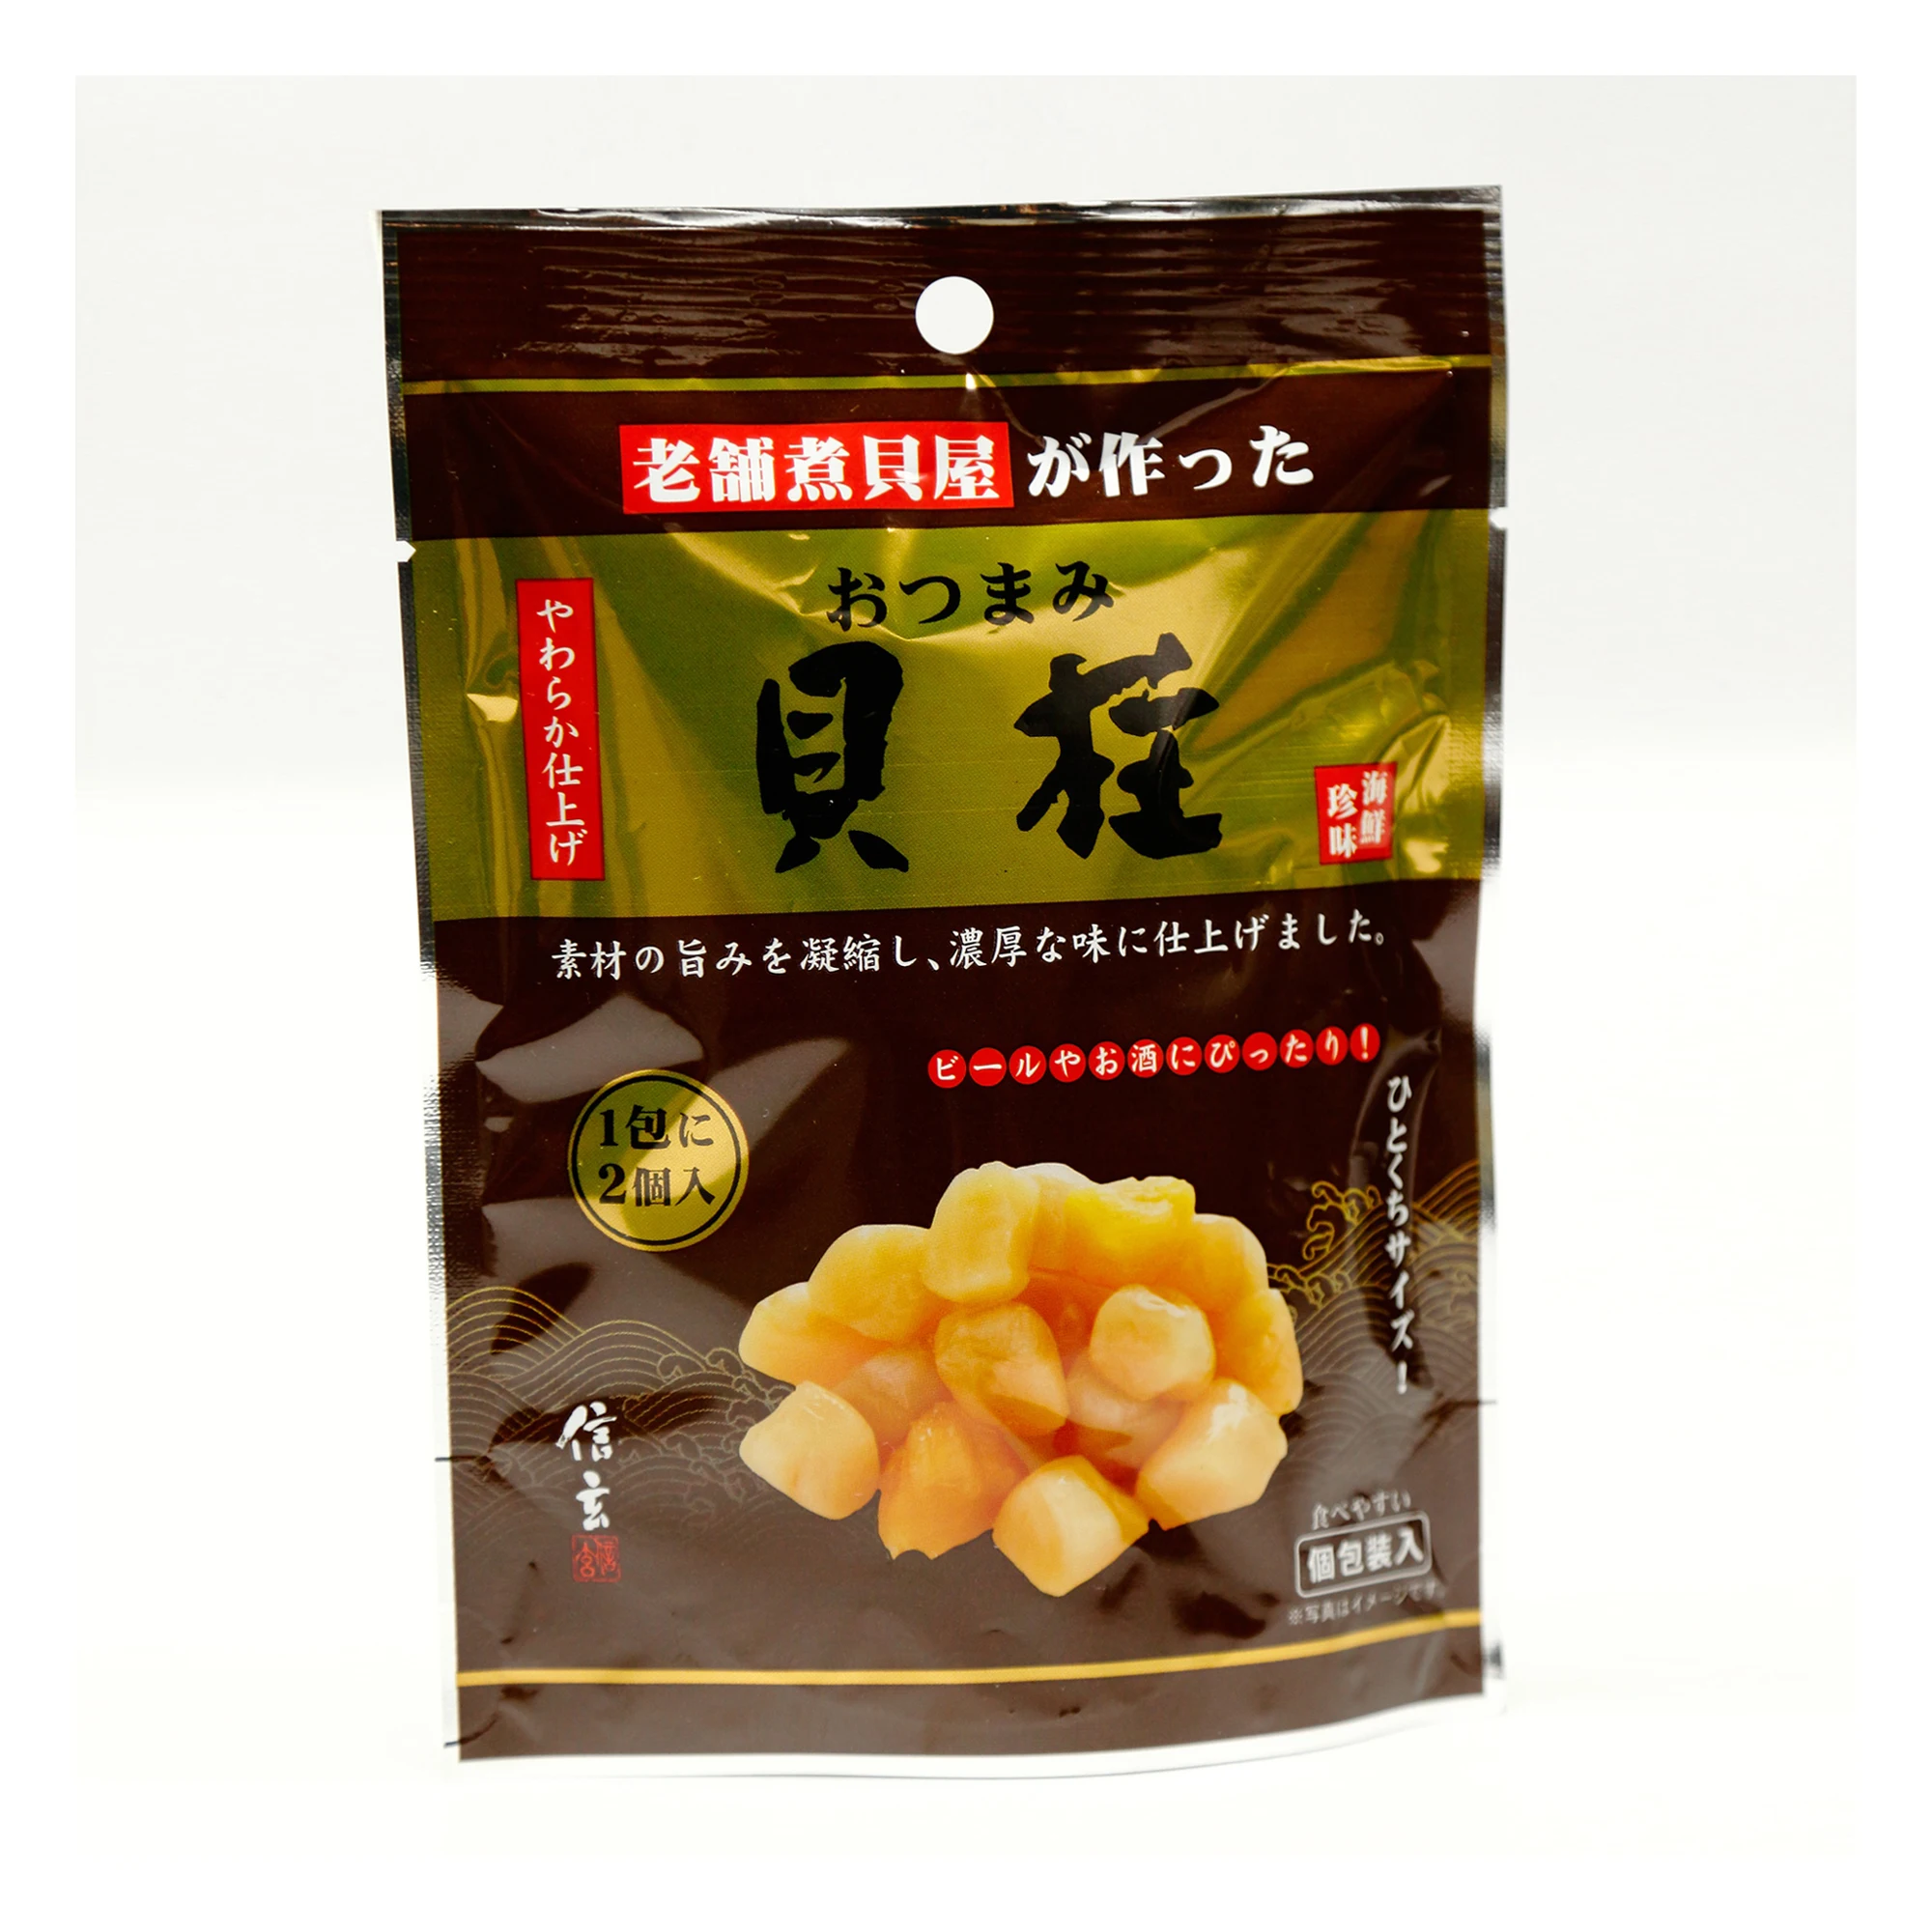 
Wholesale Japan Seafood Appetizers dried scallop for annual supply  (62367072422)